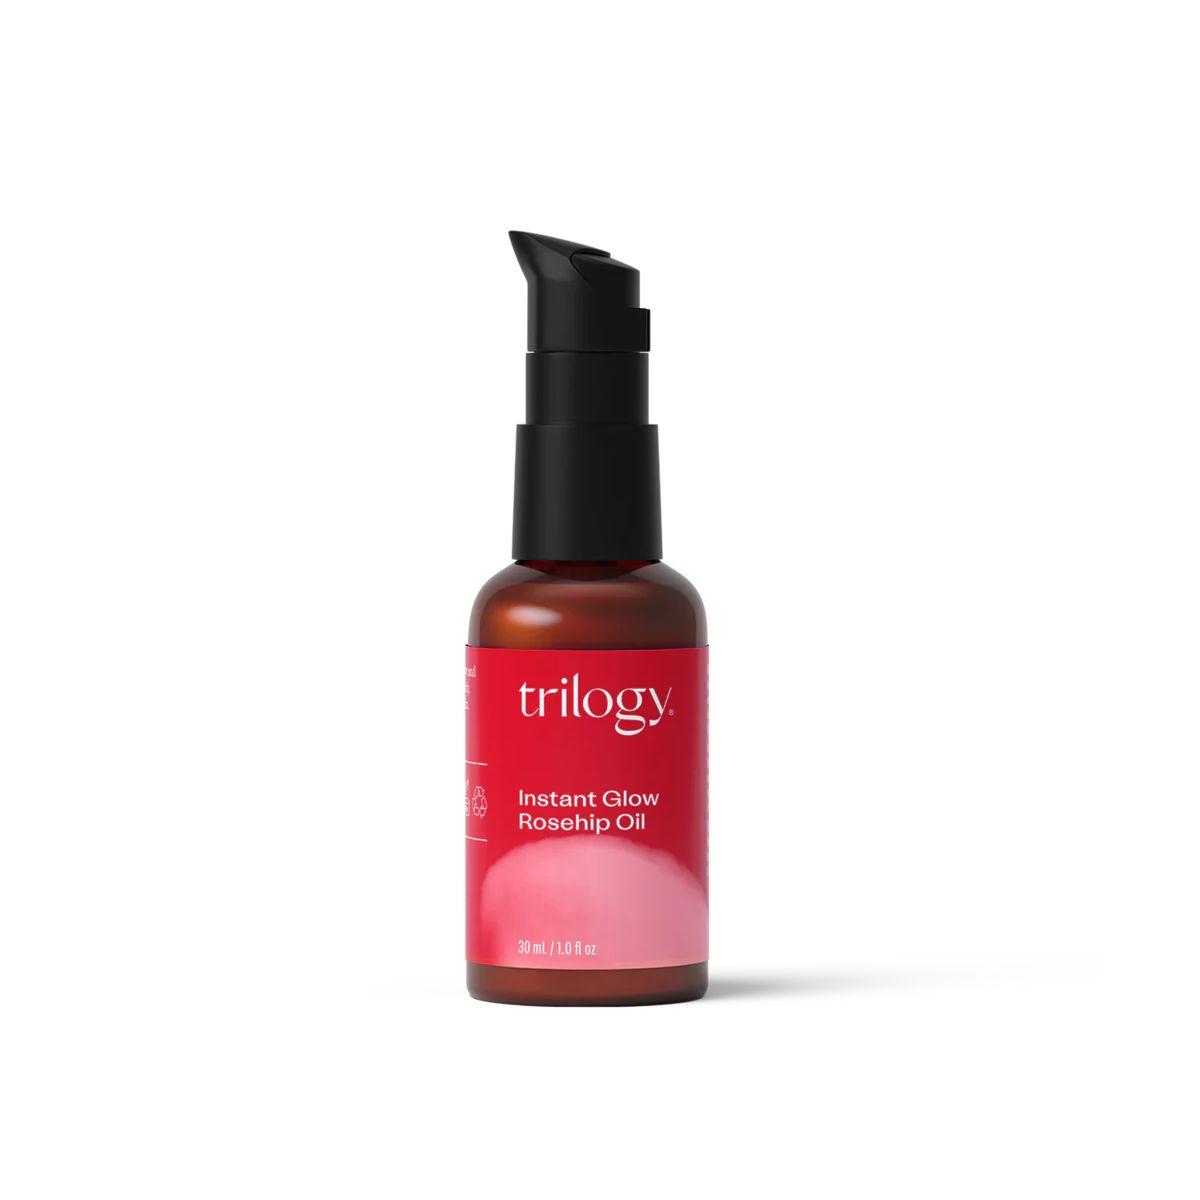 Trilogy Instant Glow Rosehip Oil 30ml – main image